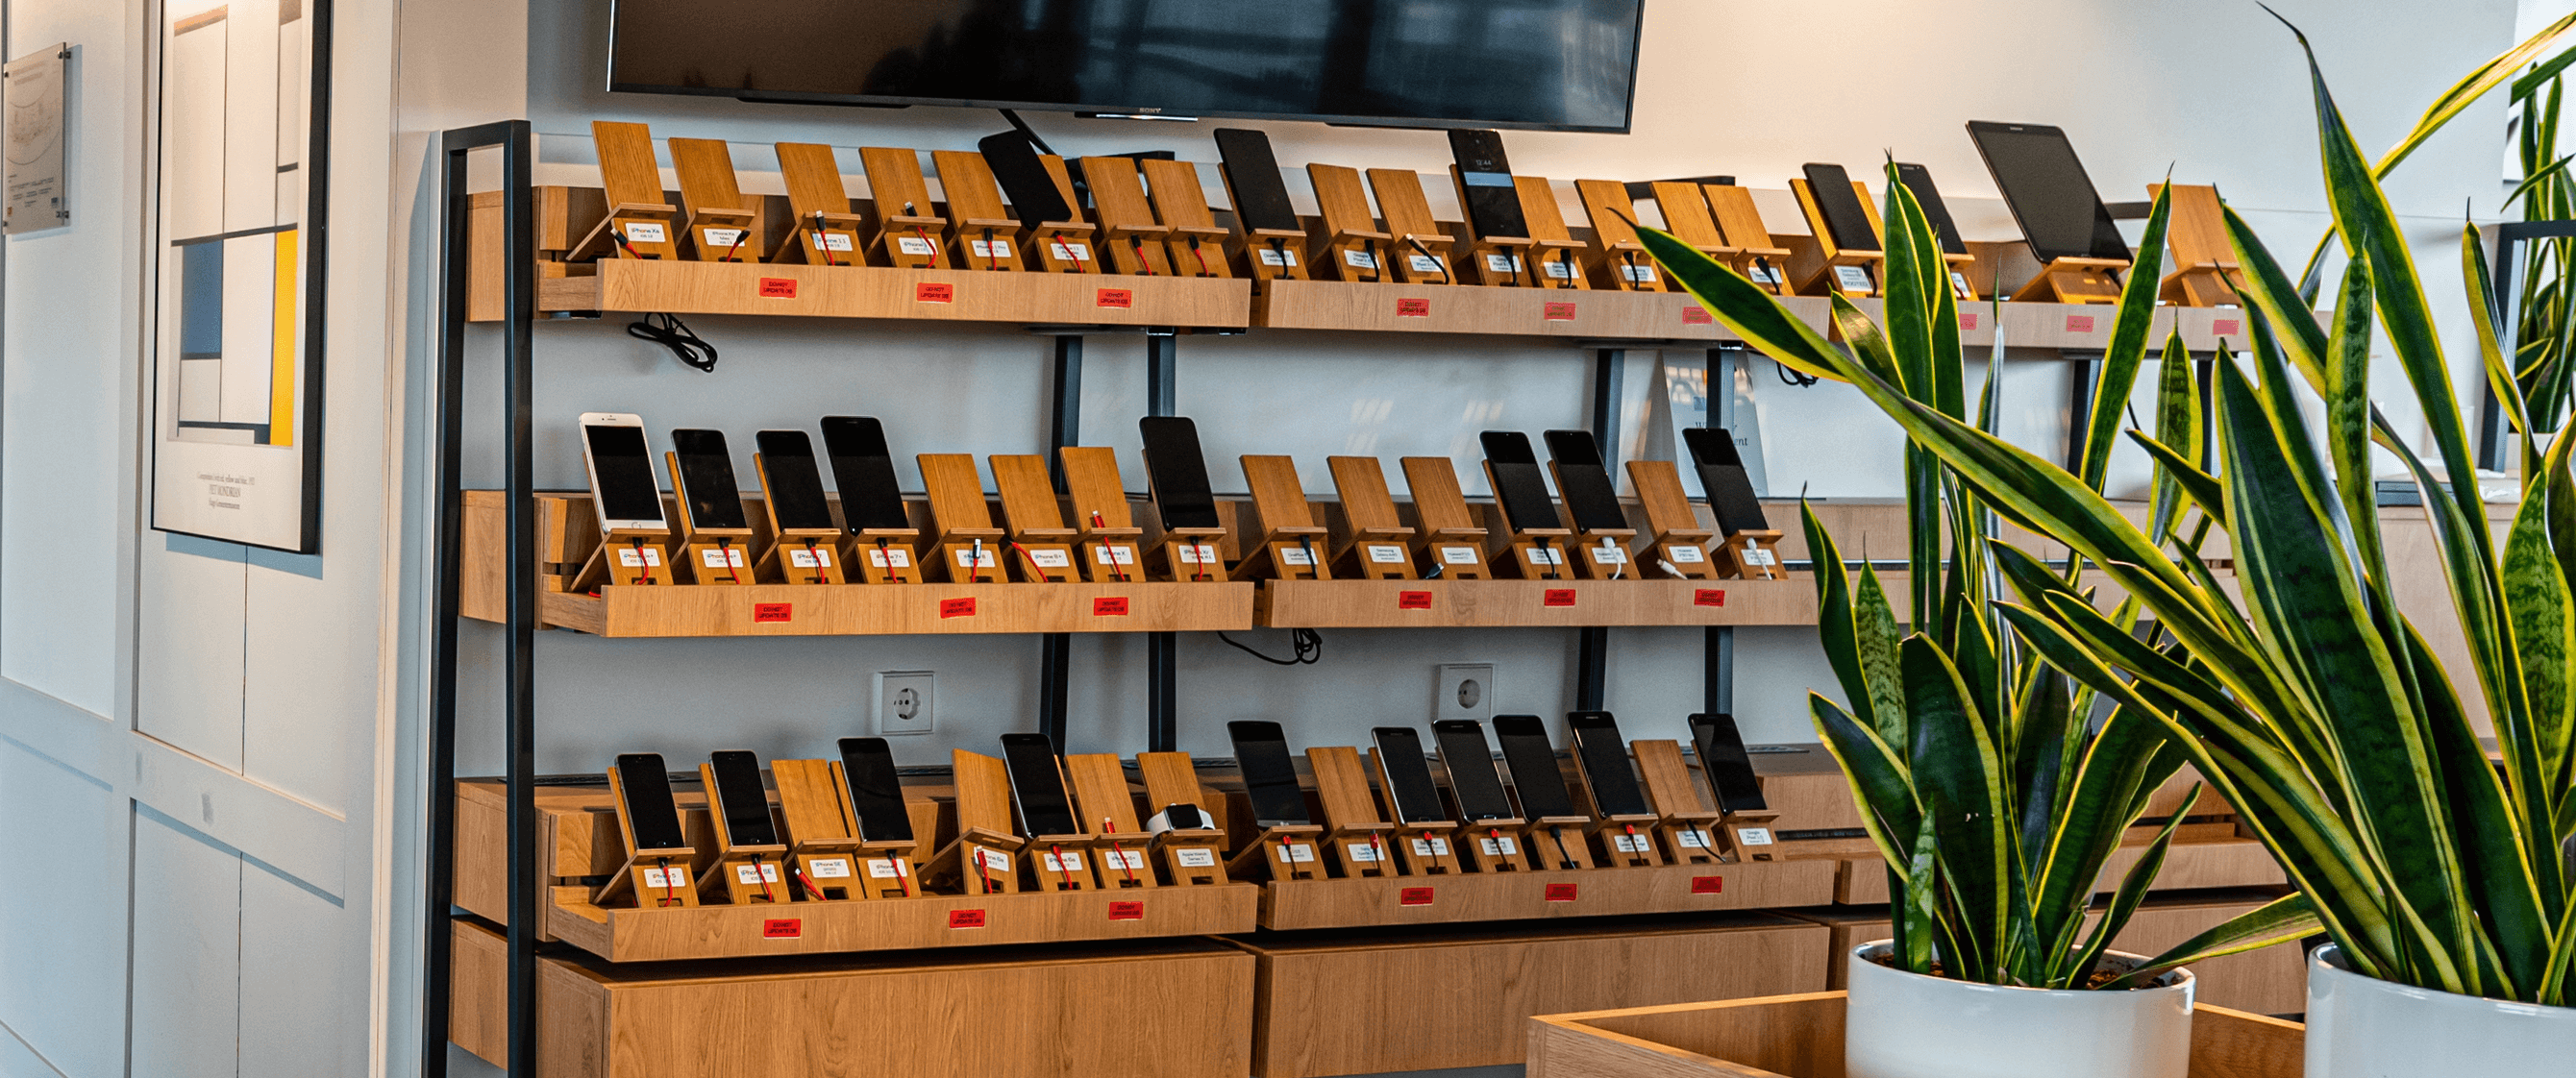 Picture of phones used for testing.